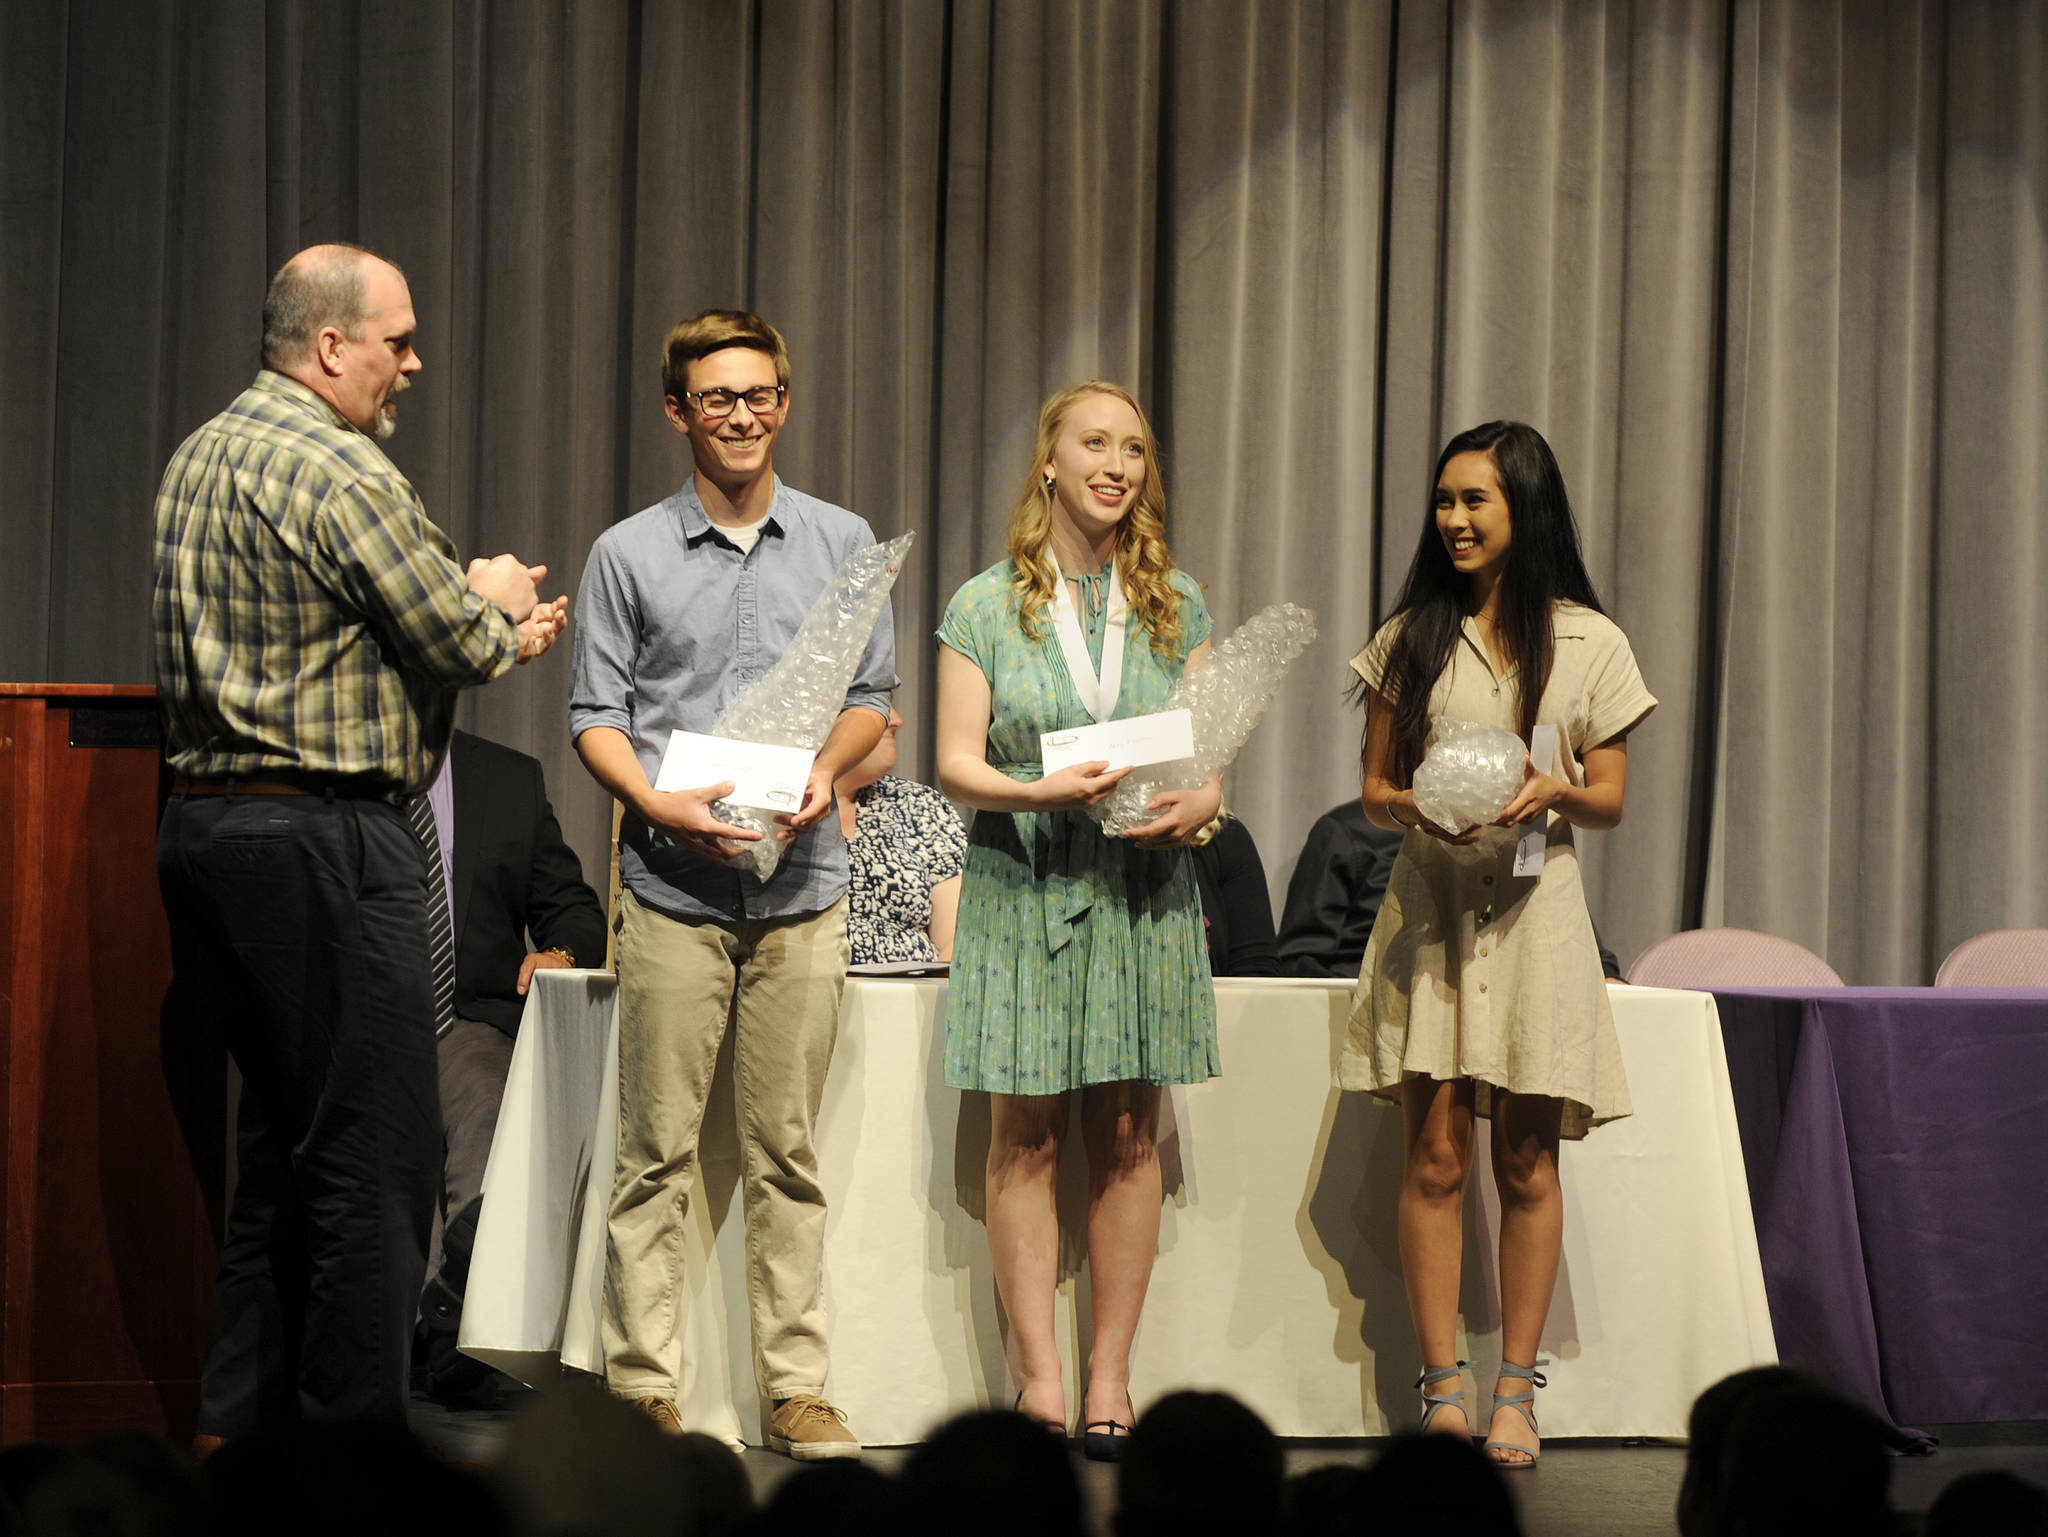 Shipley Center Executive Director Michael Smith, left, gives scholarships and trophies along with, as his tradition, some bubble wrap — “Don’t pop pills, pop bubble wrap” — to SHS graduating seniors Josiah Carter, Abby Norman and Andrea Albaugh. Sequim Gazette photo by Michael Dashiell